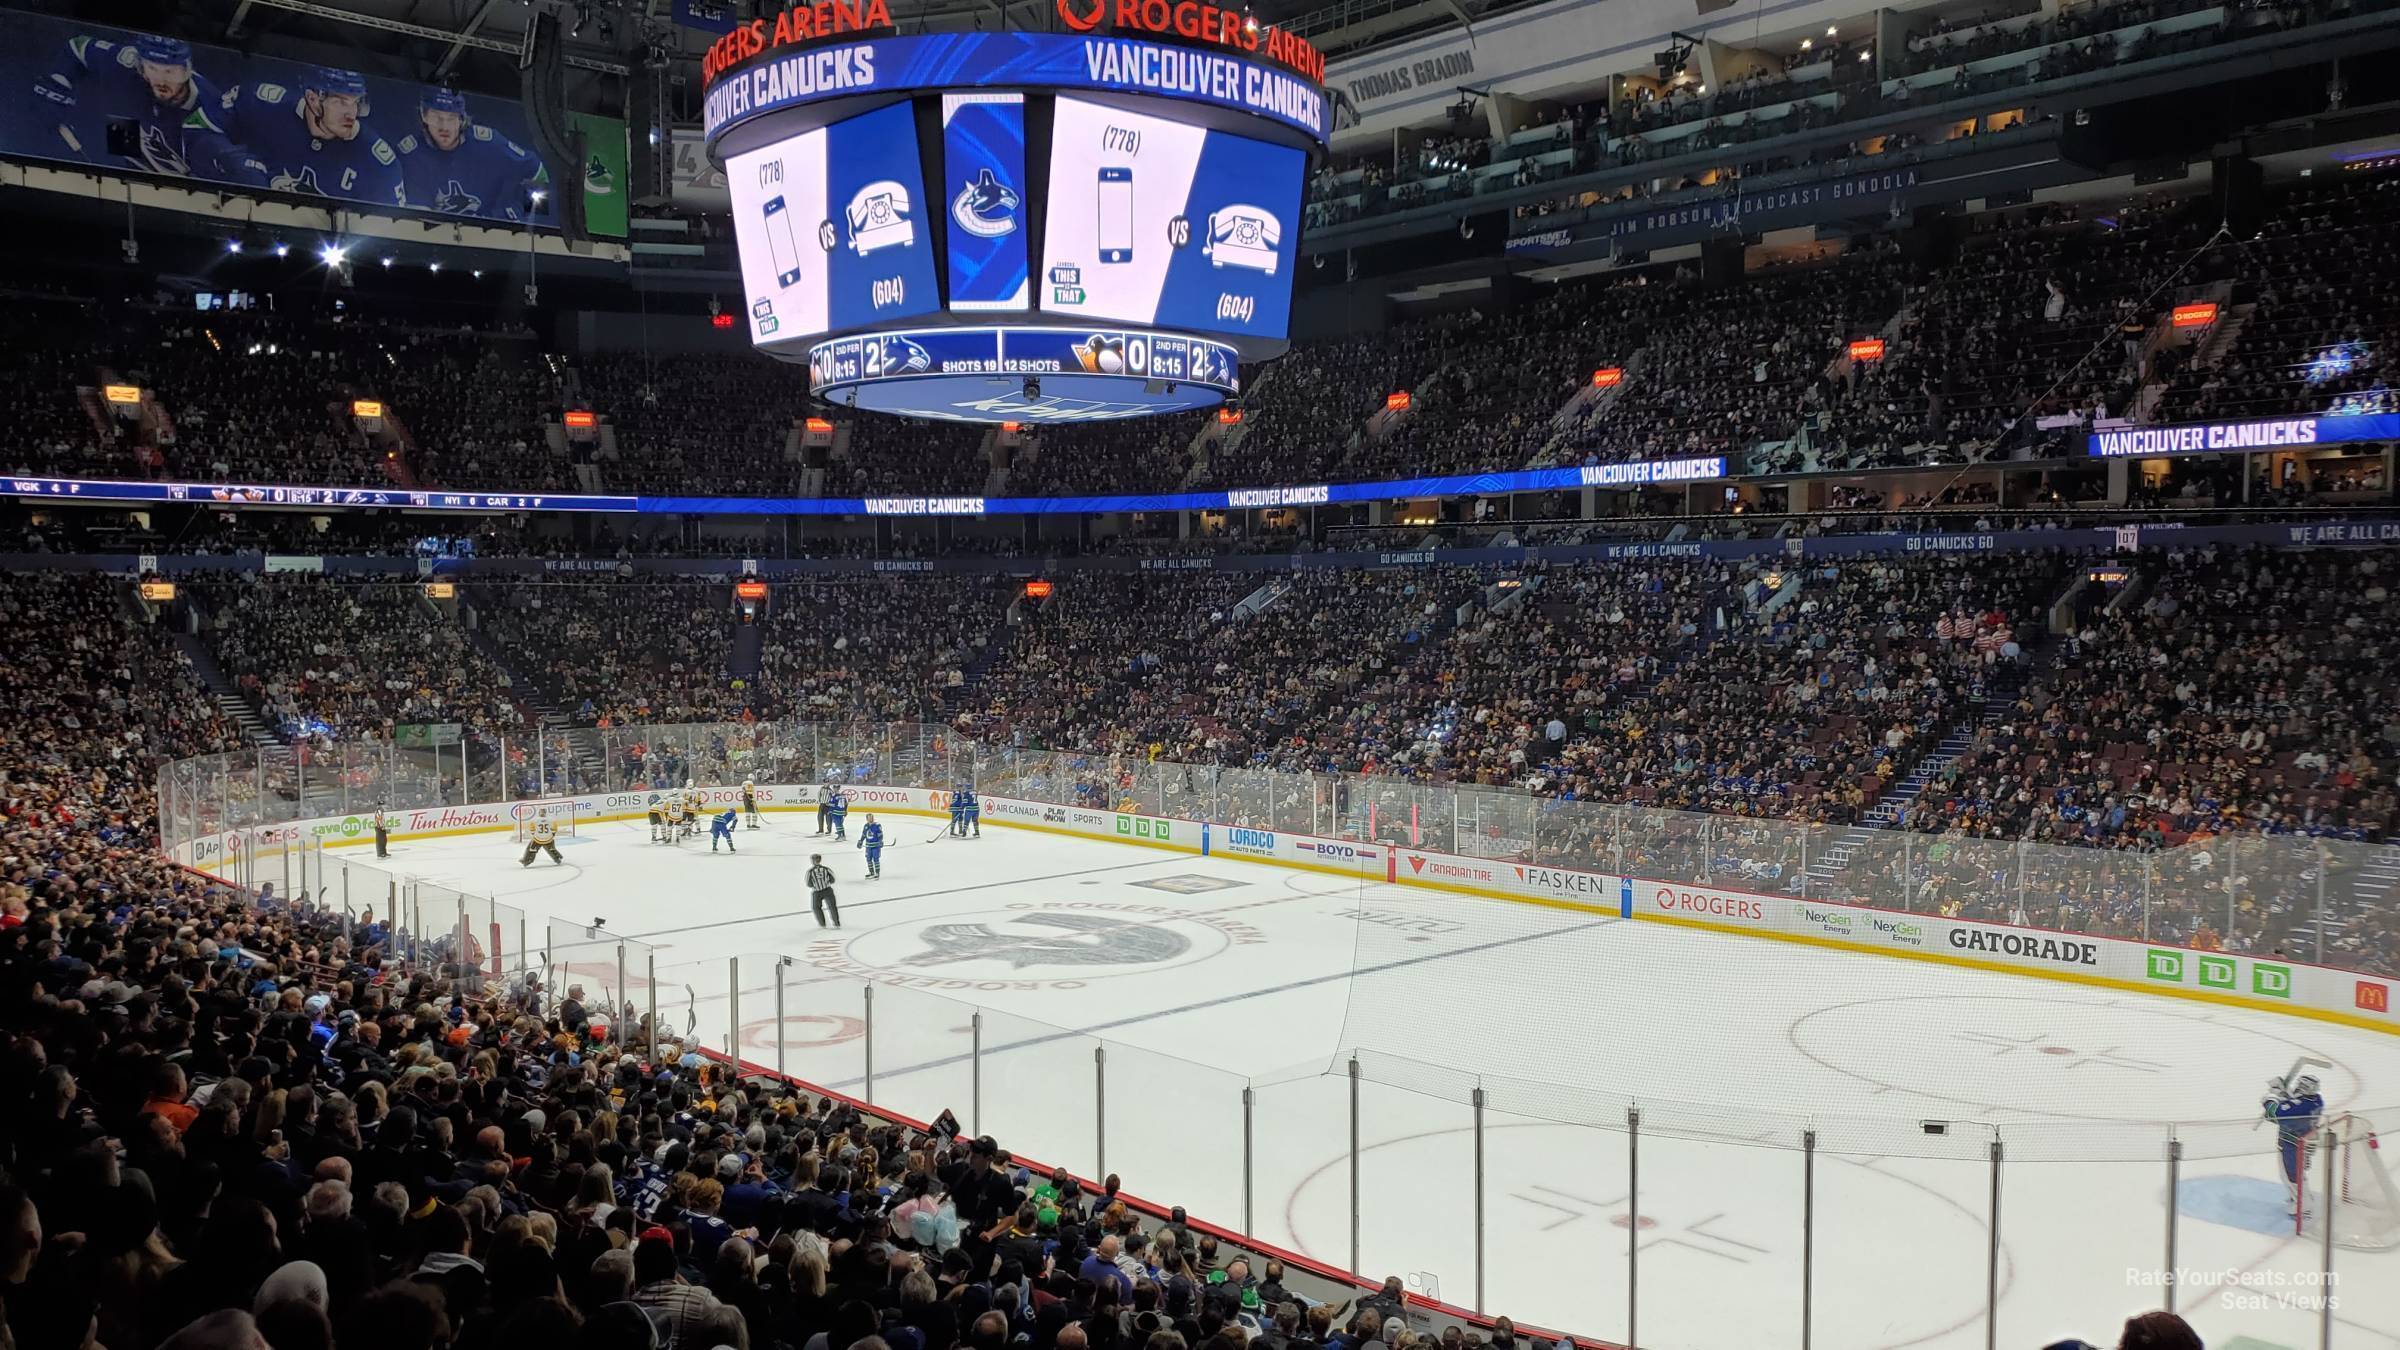 section 114, row 21 seat view  for hockey - rogers arena